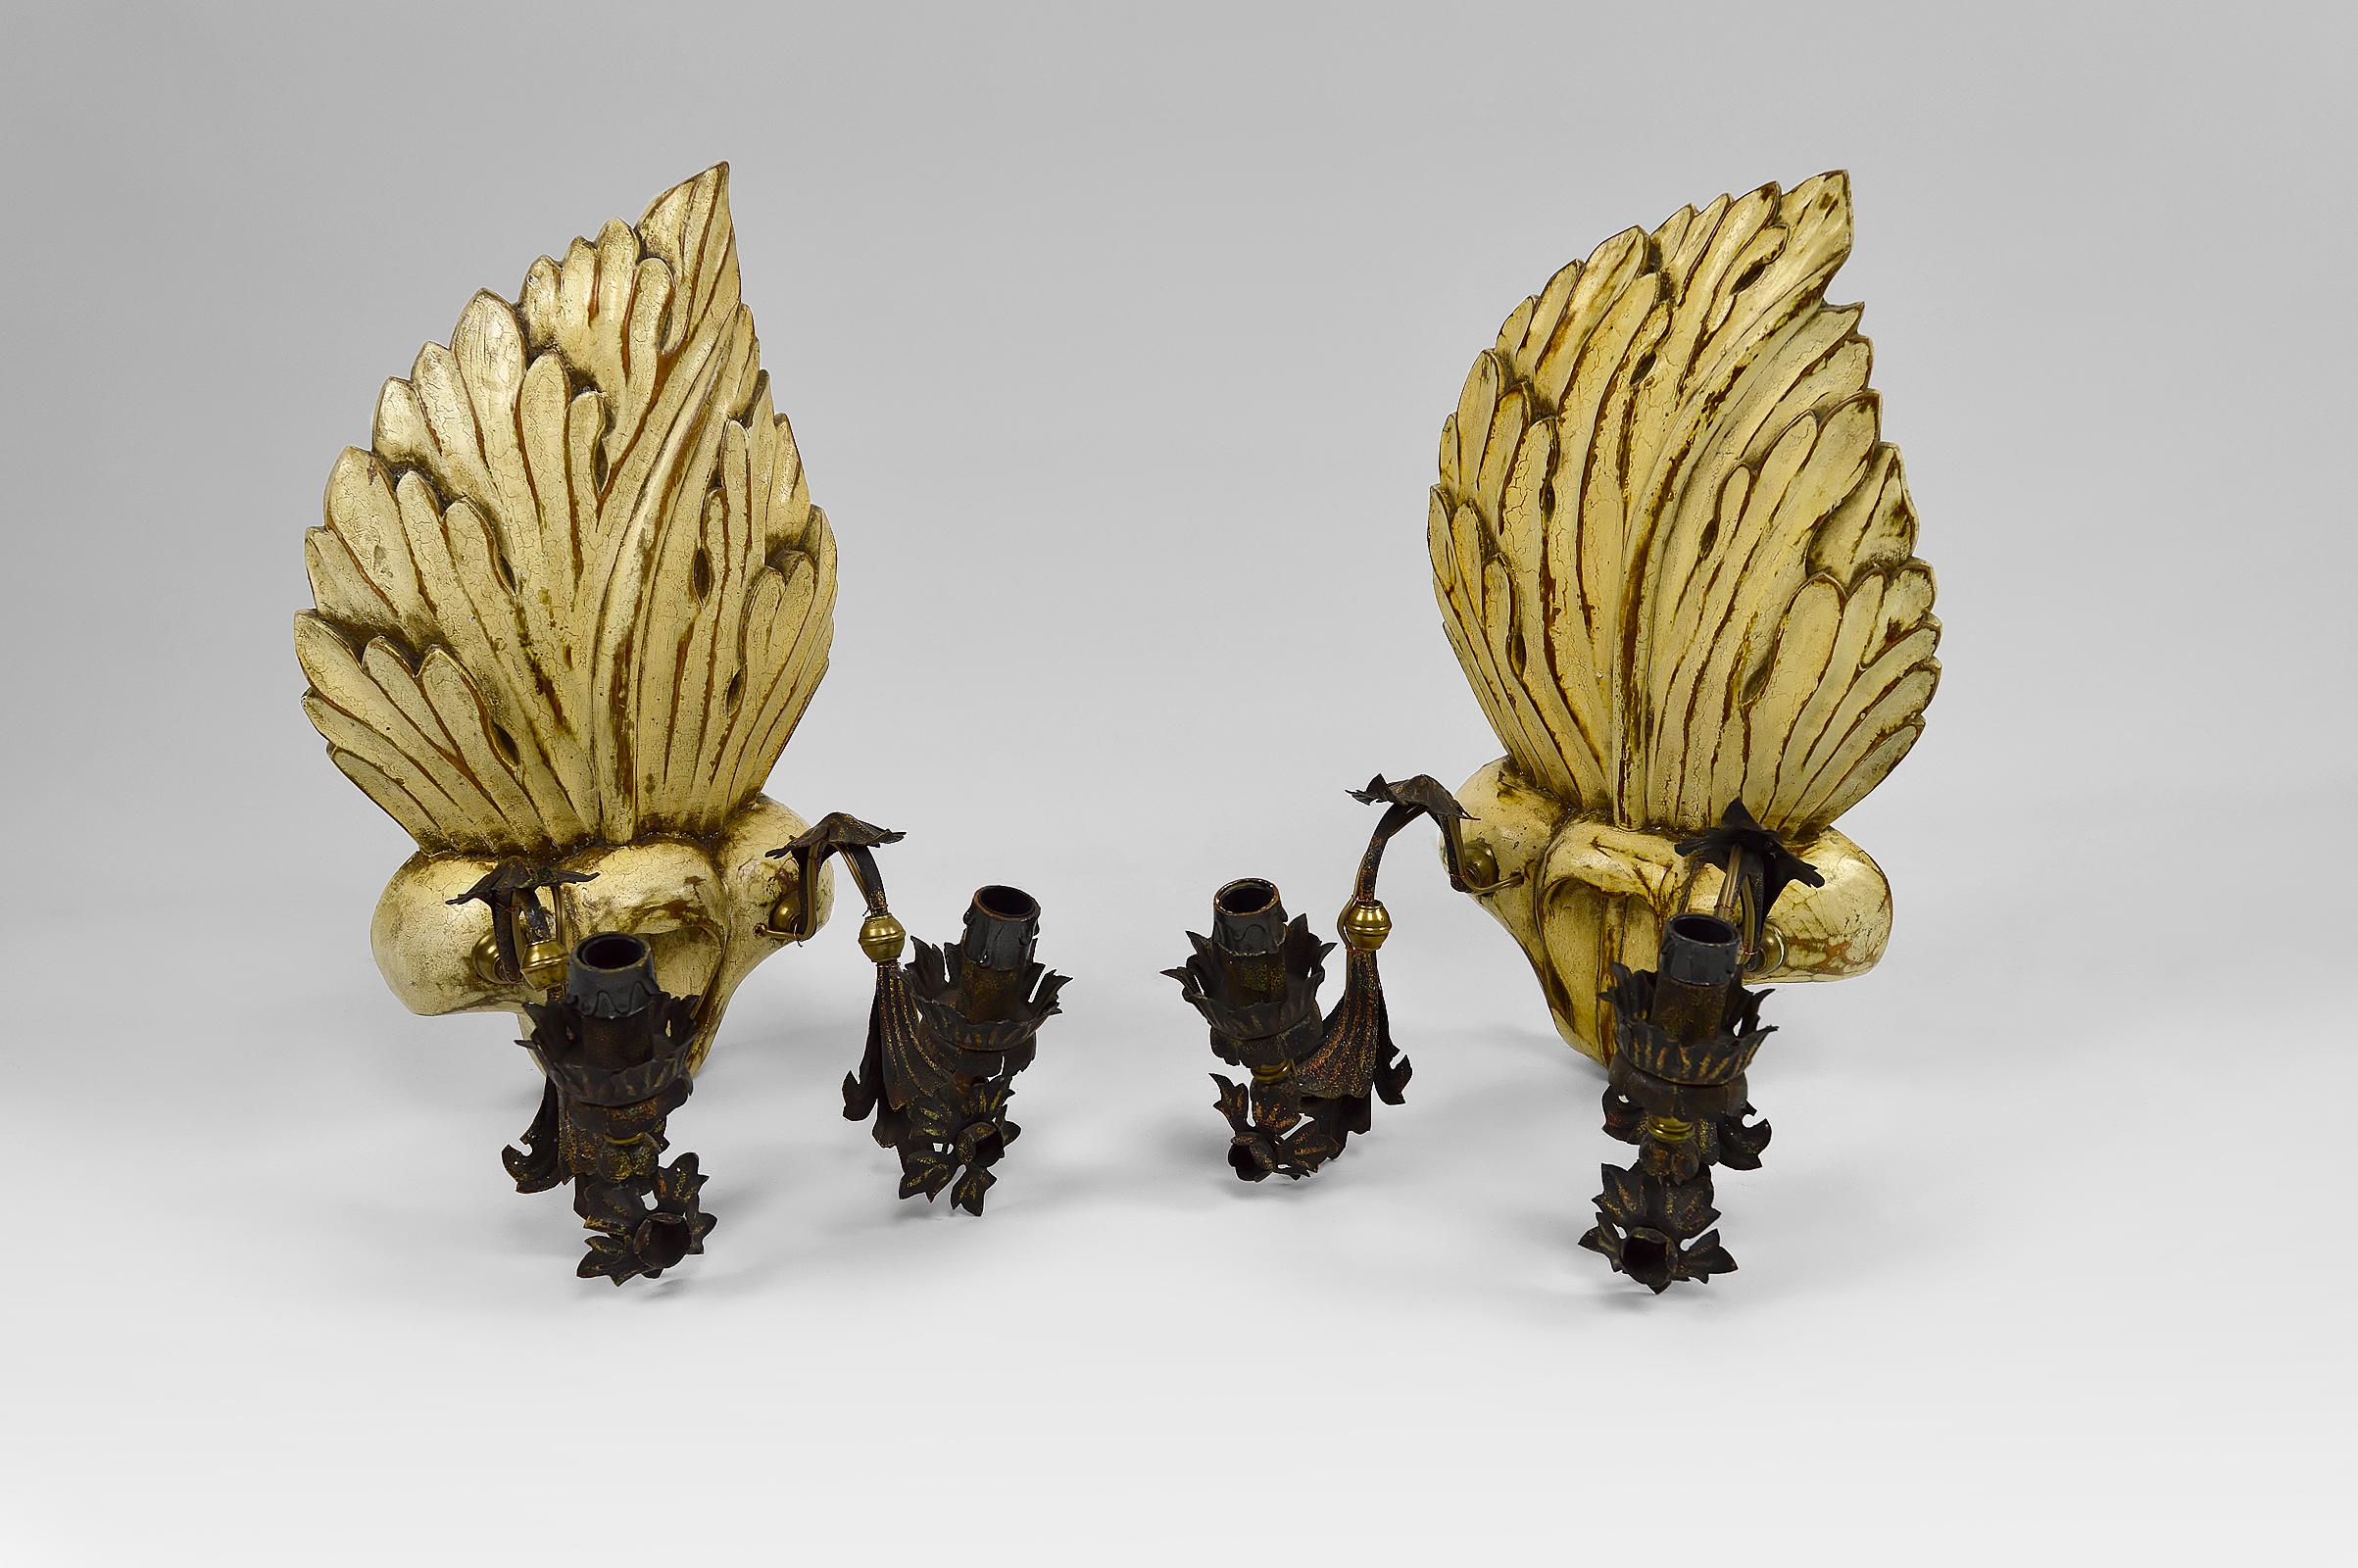 Pair of carved, painted and patinated wooden sconces.

Each wall lamp has 2 wrought iron arms supporting a fire.

Hollywood Regency / Baroque Revival, France or Italy. Circa 1950-1960
In the style of the productions of Ramsay, Jansen, Moreux.

In